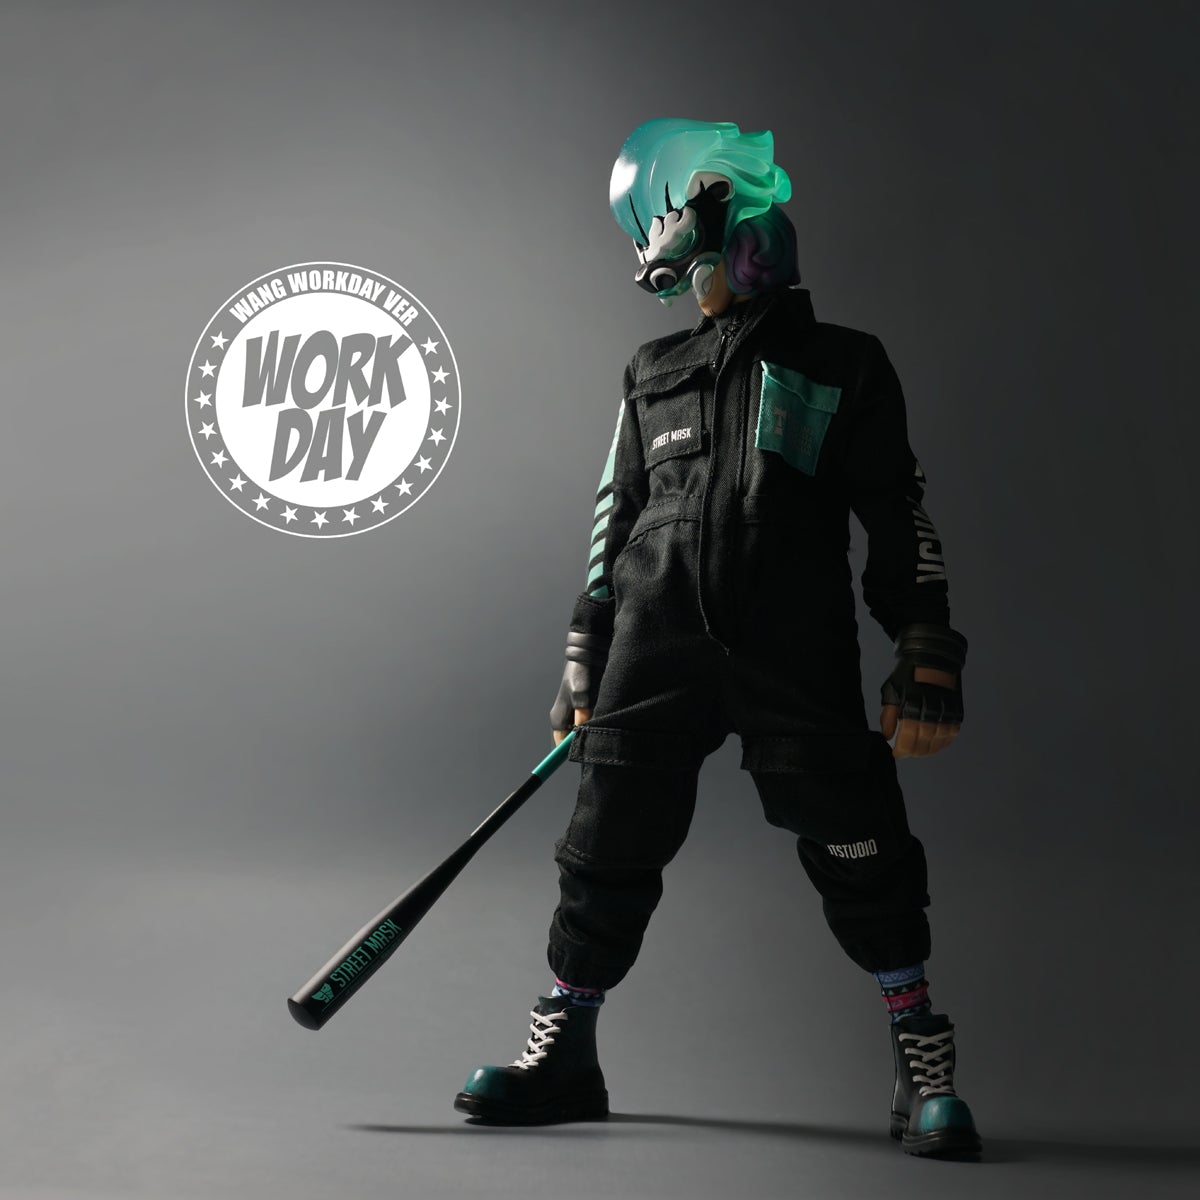 WANG Work Day 1/6-scale Street Mask action figure by JT Studio Available Now